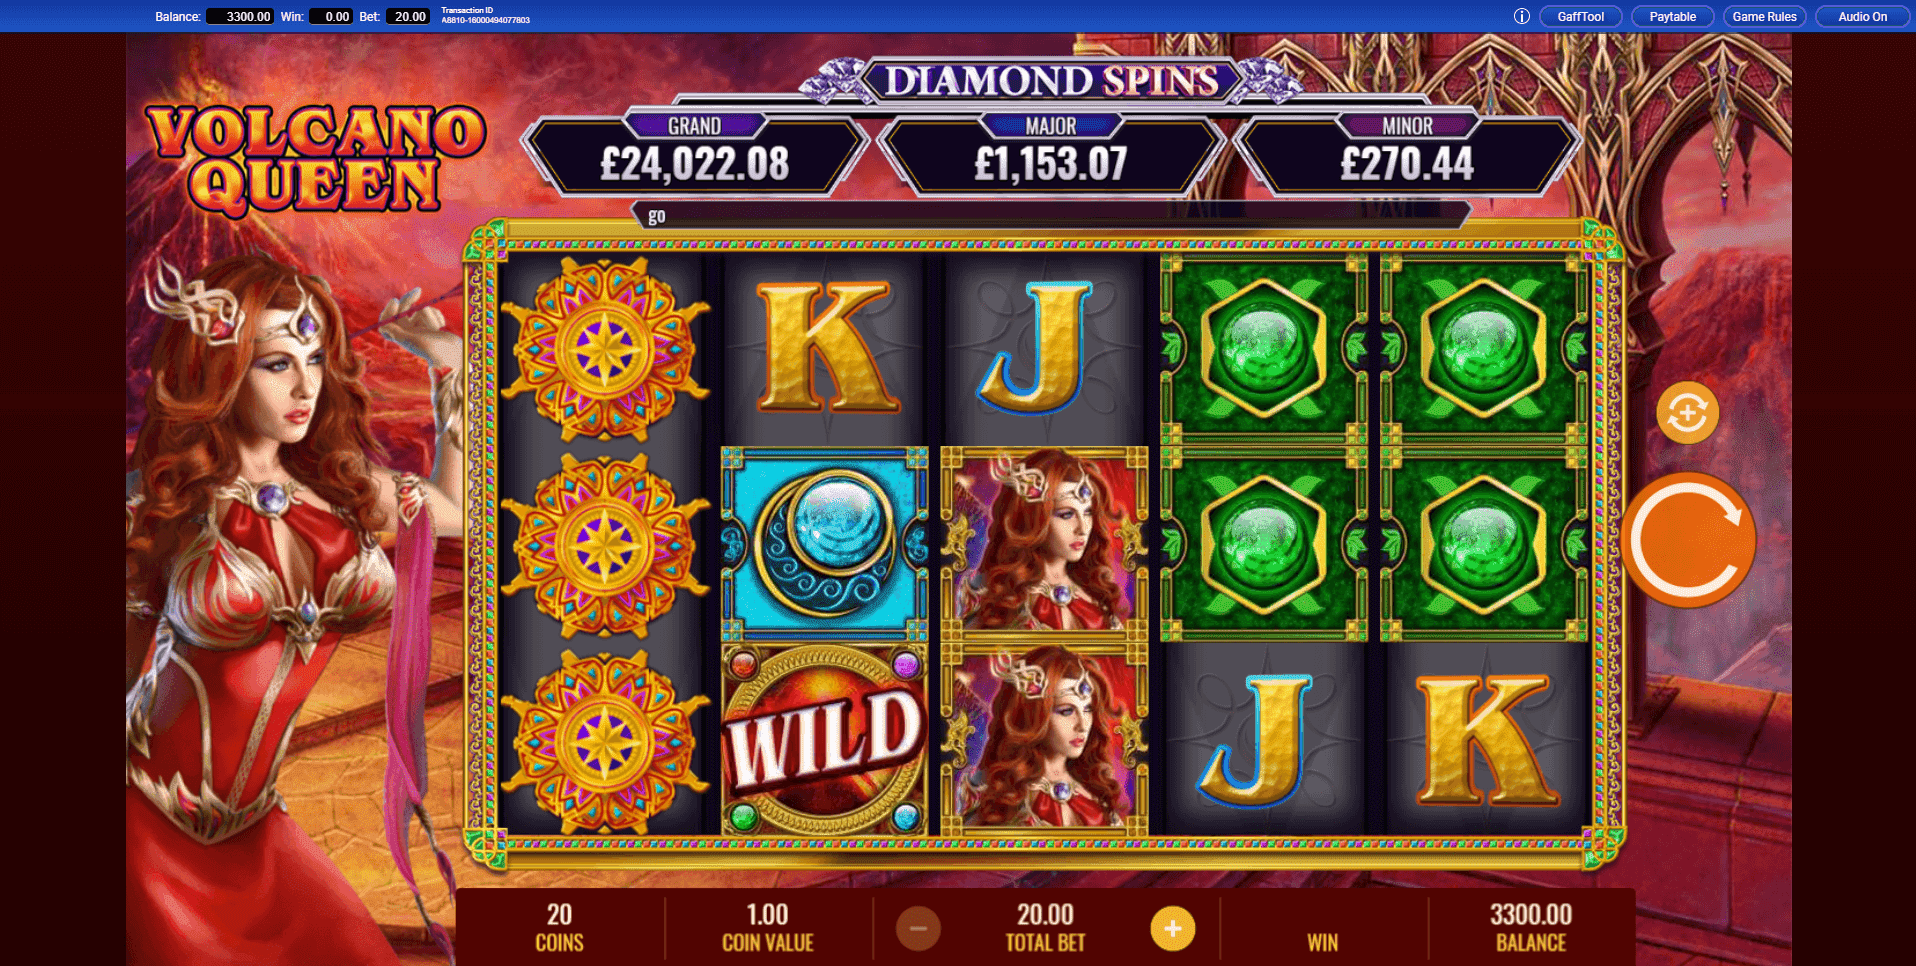 Volcano Queen Diamond Spins slot play free